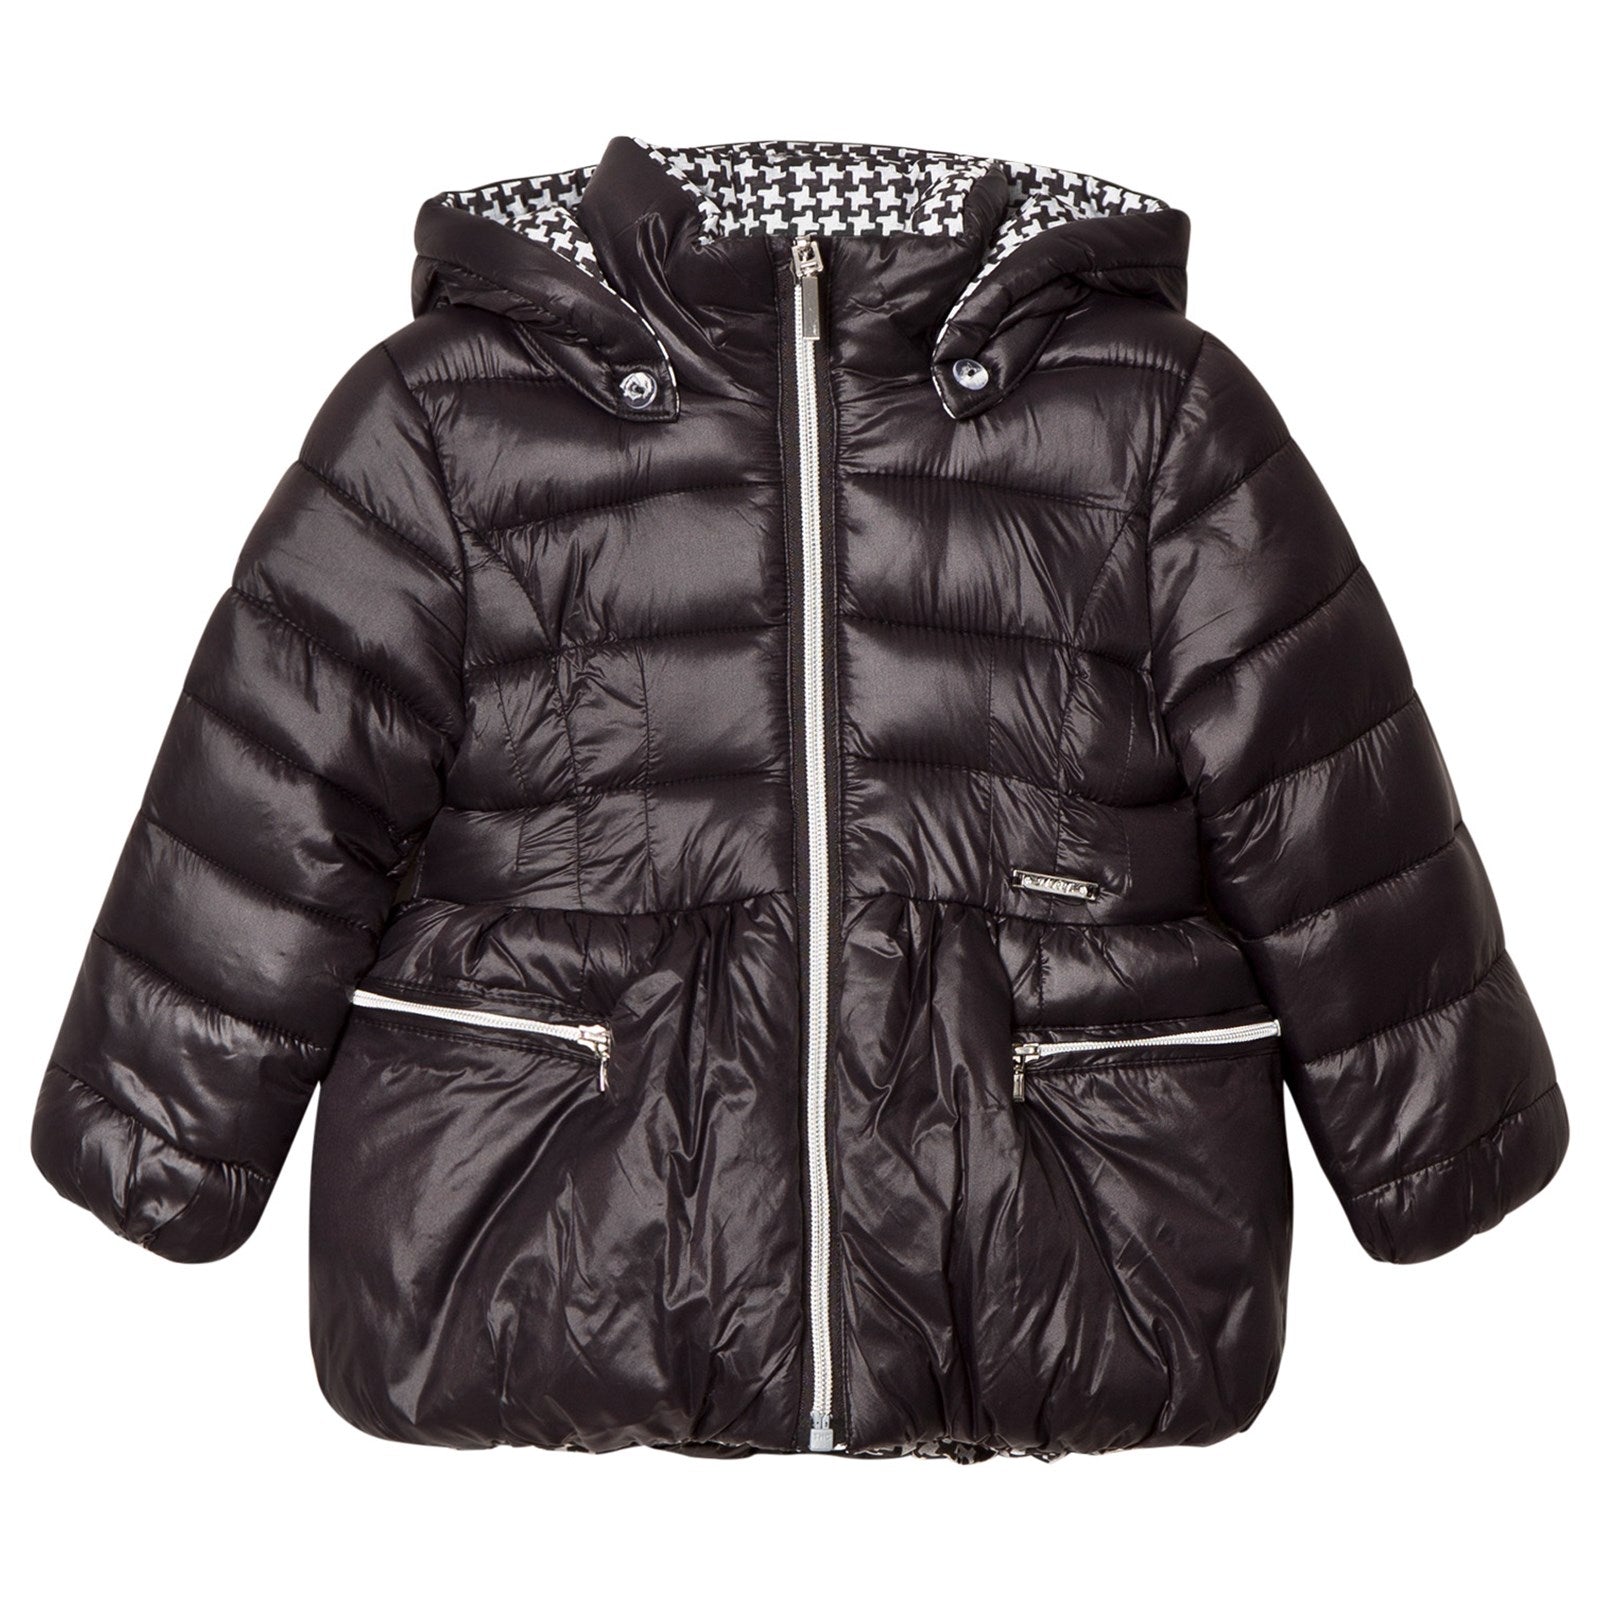 Reversible Houndstooth Puffy Jacket